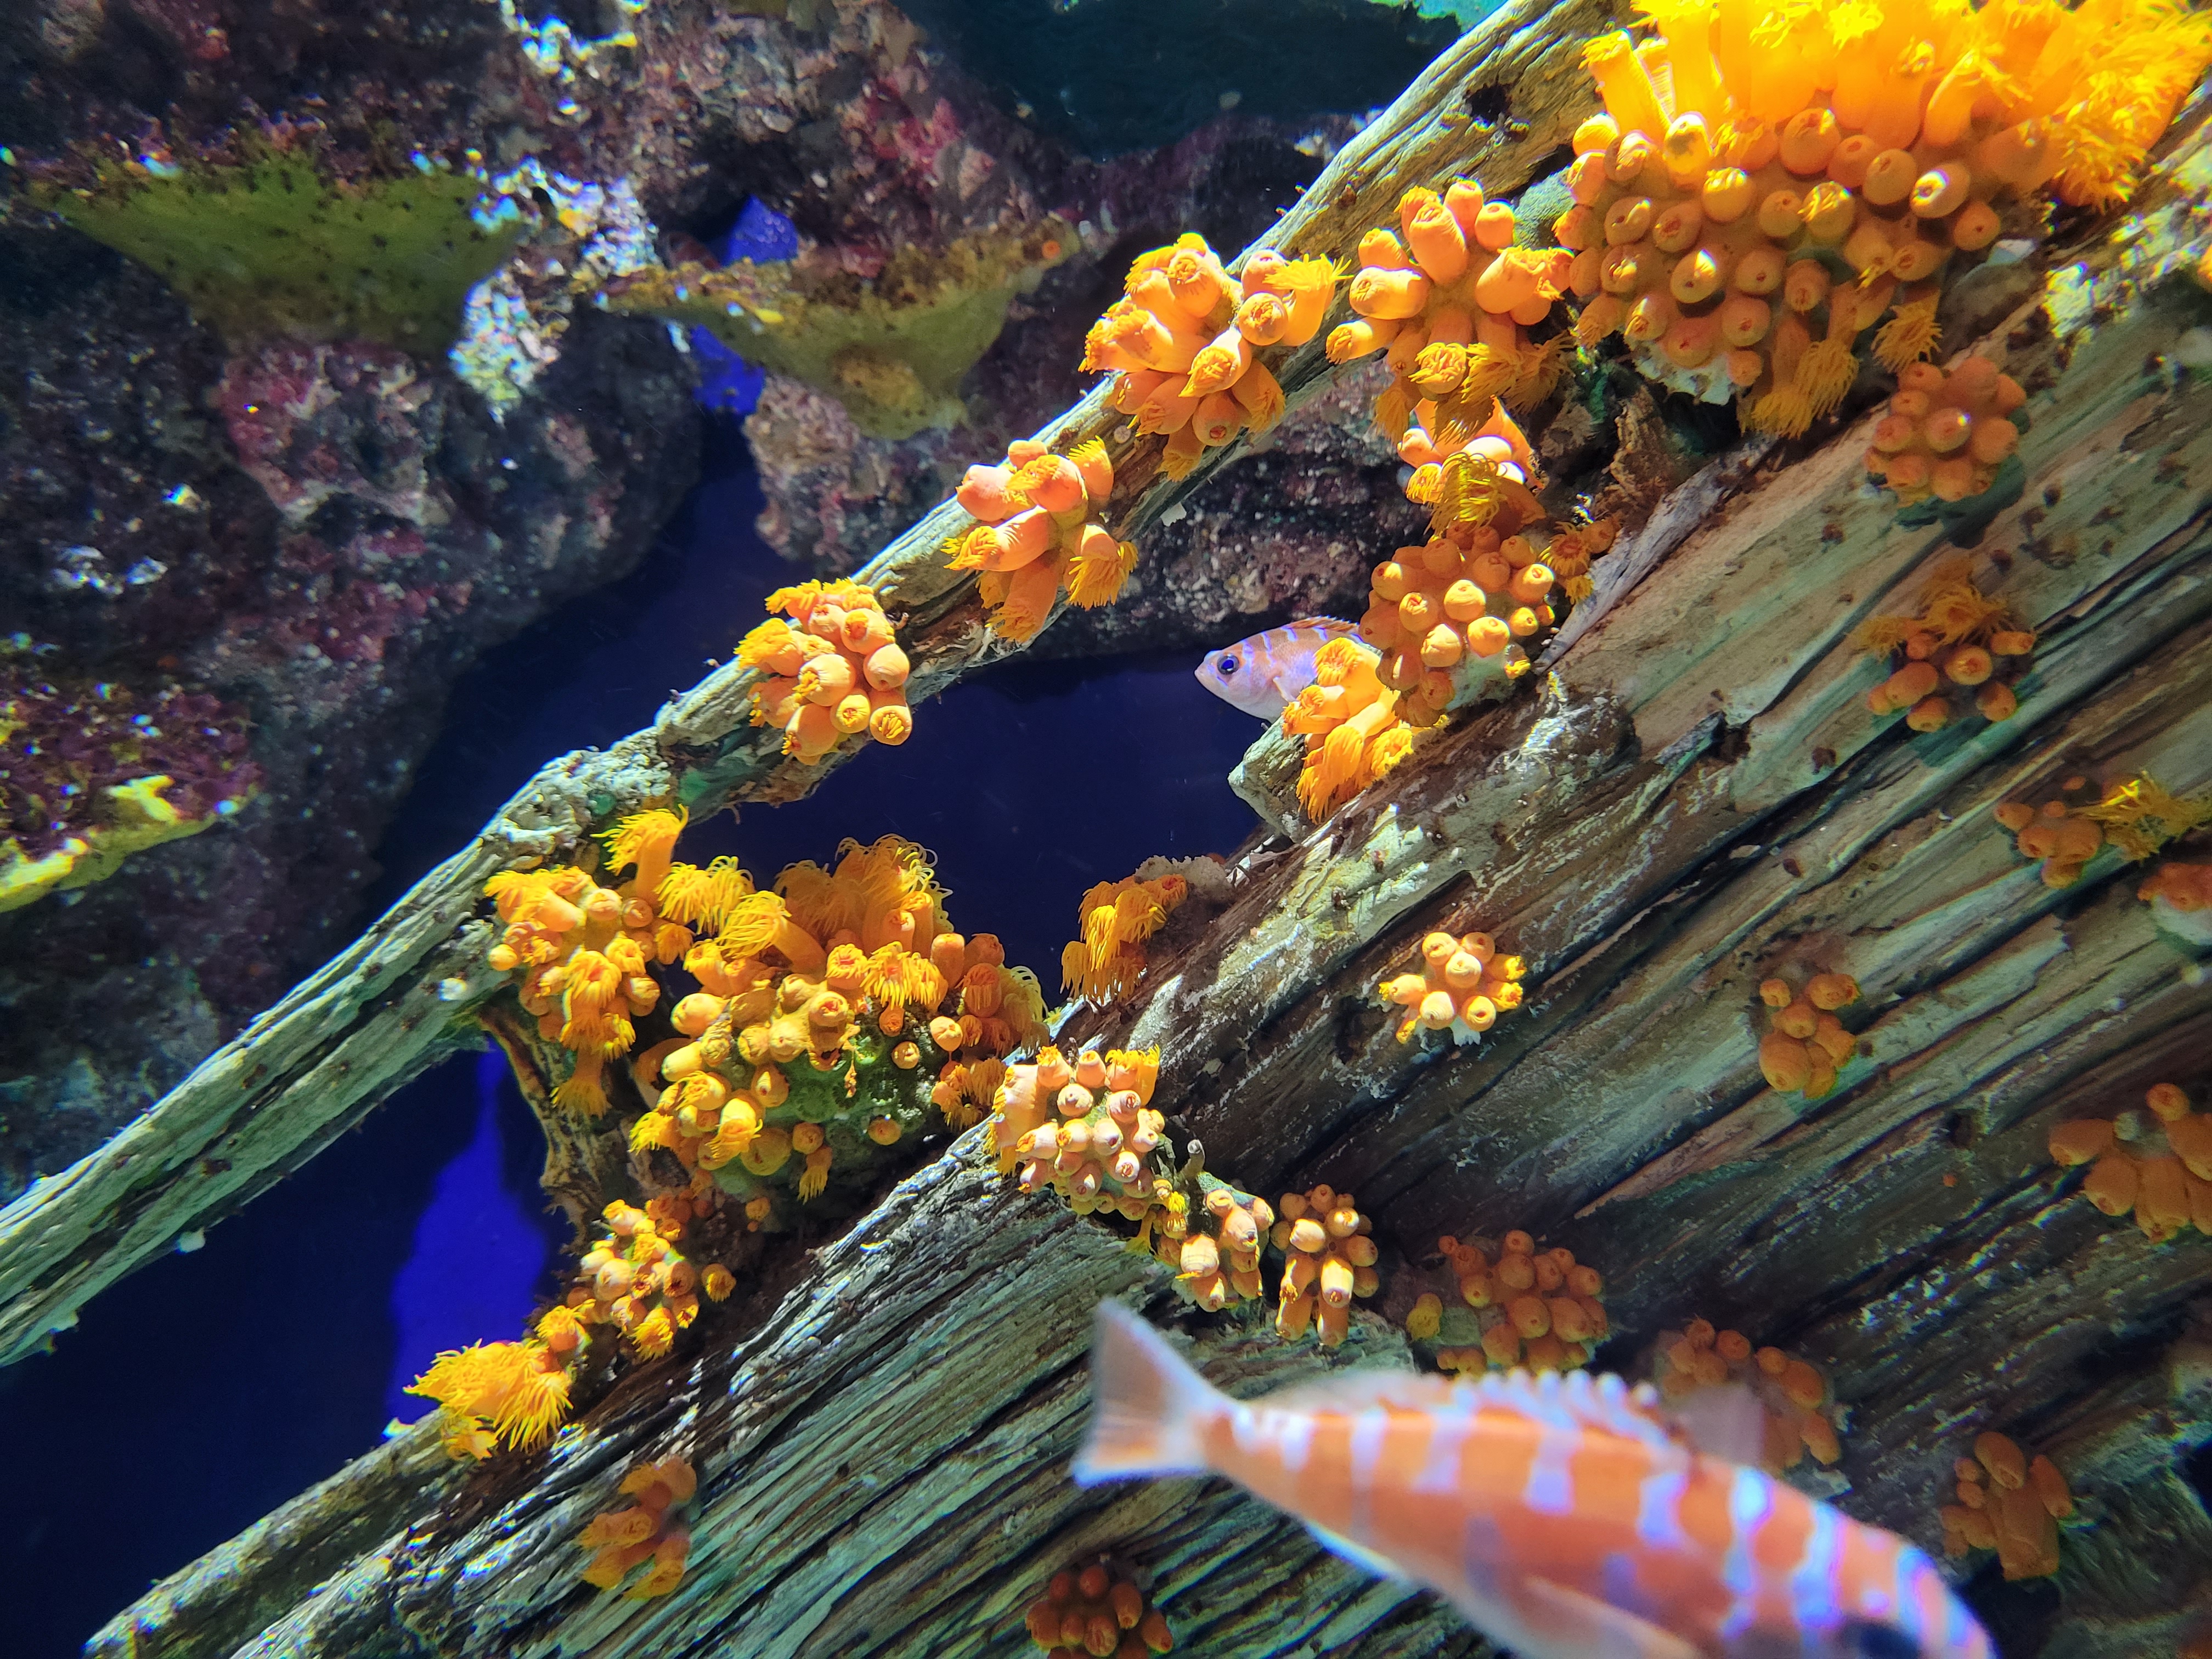 A view of a fish peeking out in a gap between some wood in an aquarium.